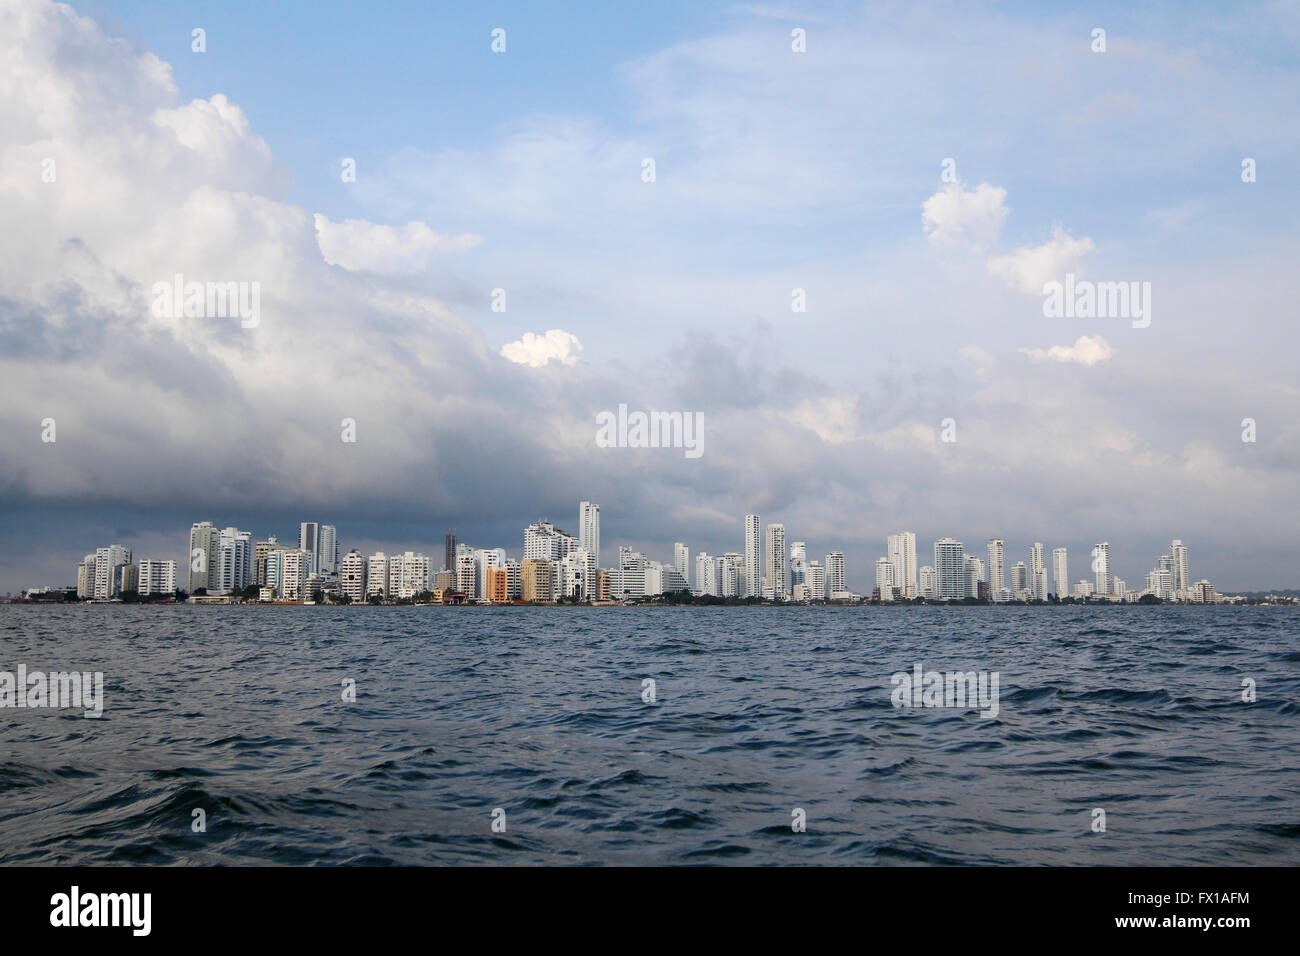 Cartagena, Colombia skyline as seen from the sea Stock Photo